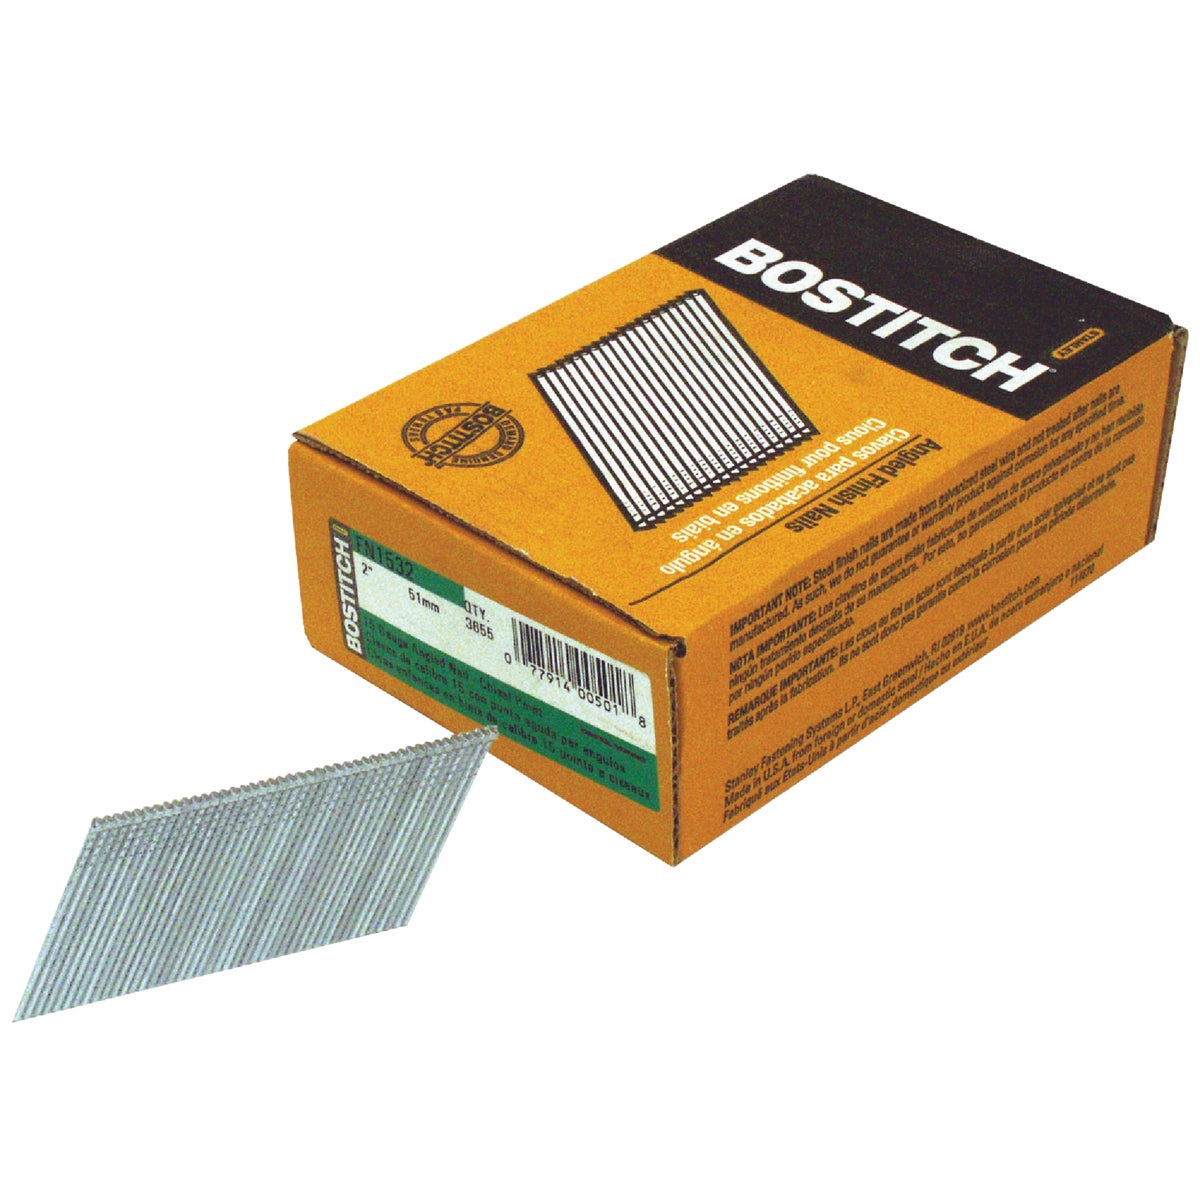 Bostitch 15-Gauge Coated 25 Degree FN-Style Angled Finish Nail, 2 In. (3655 Ct.)